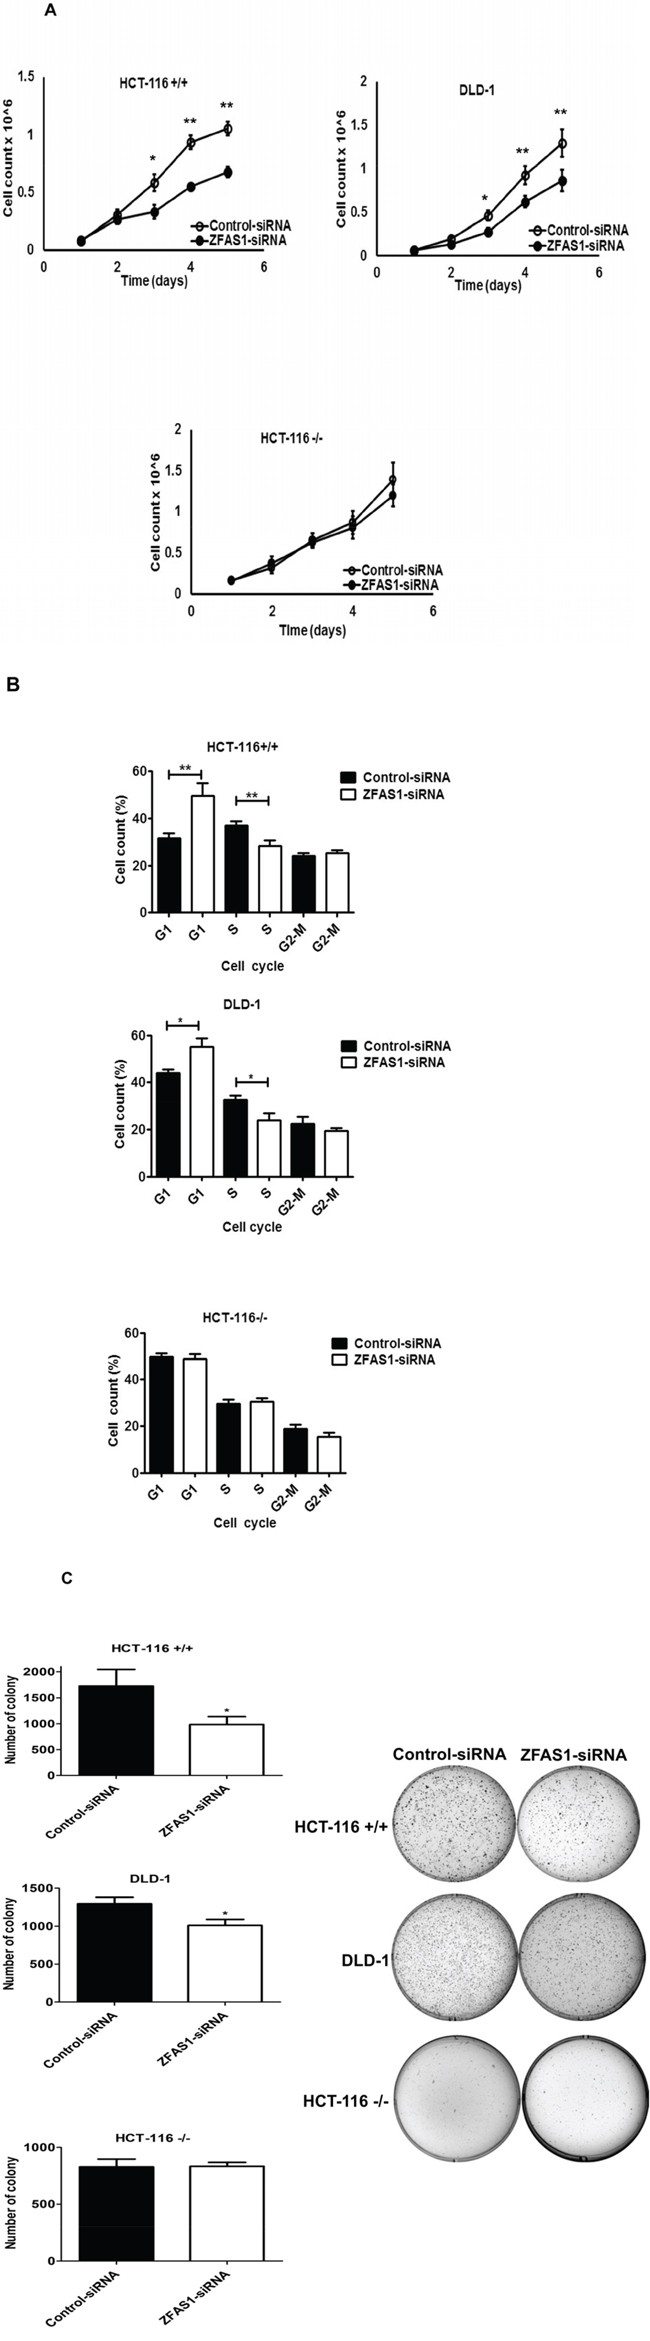 Effects of ZFAS1 knockdown on colorectal cancer cell proliferation in vitro.